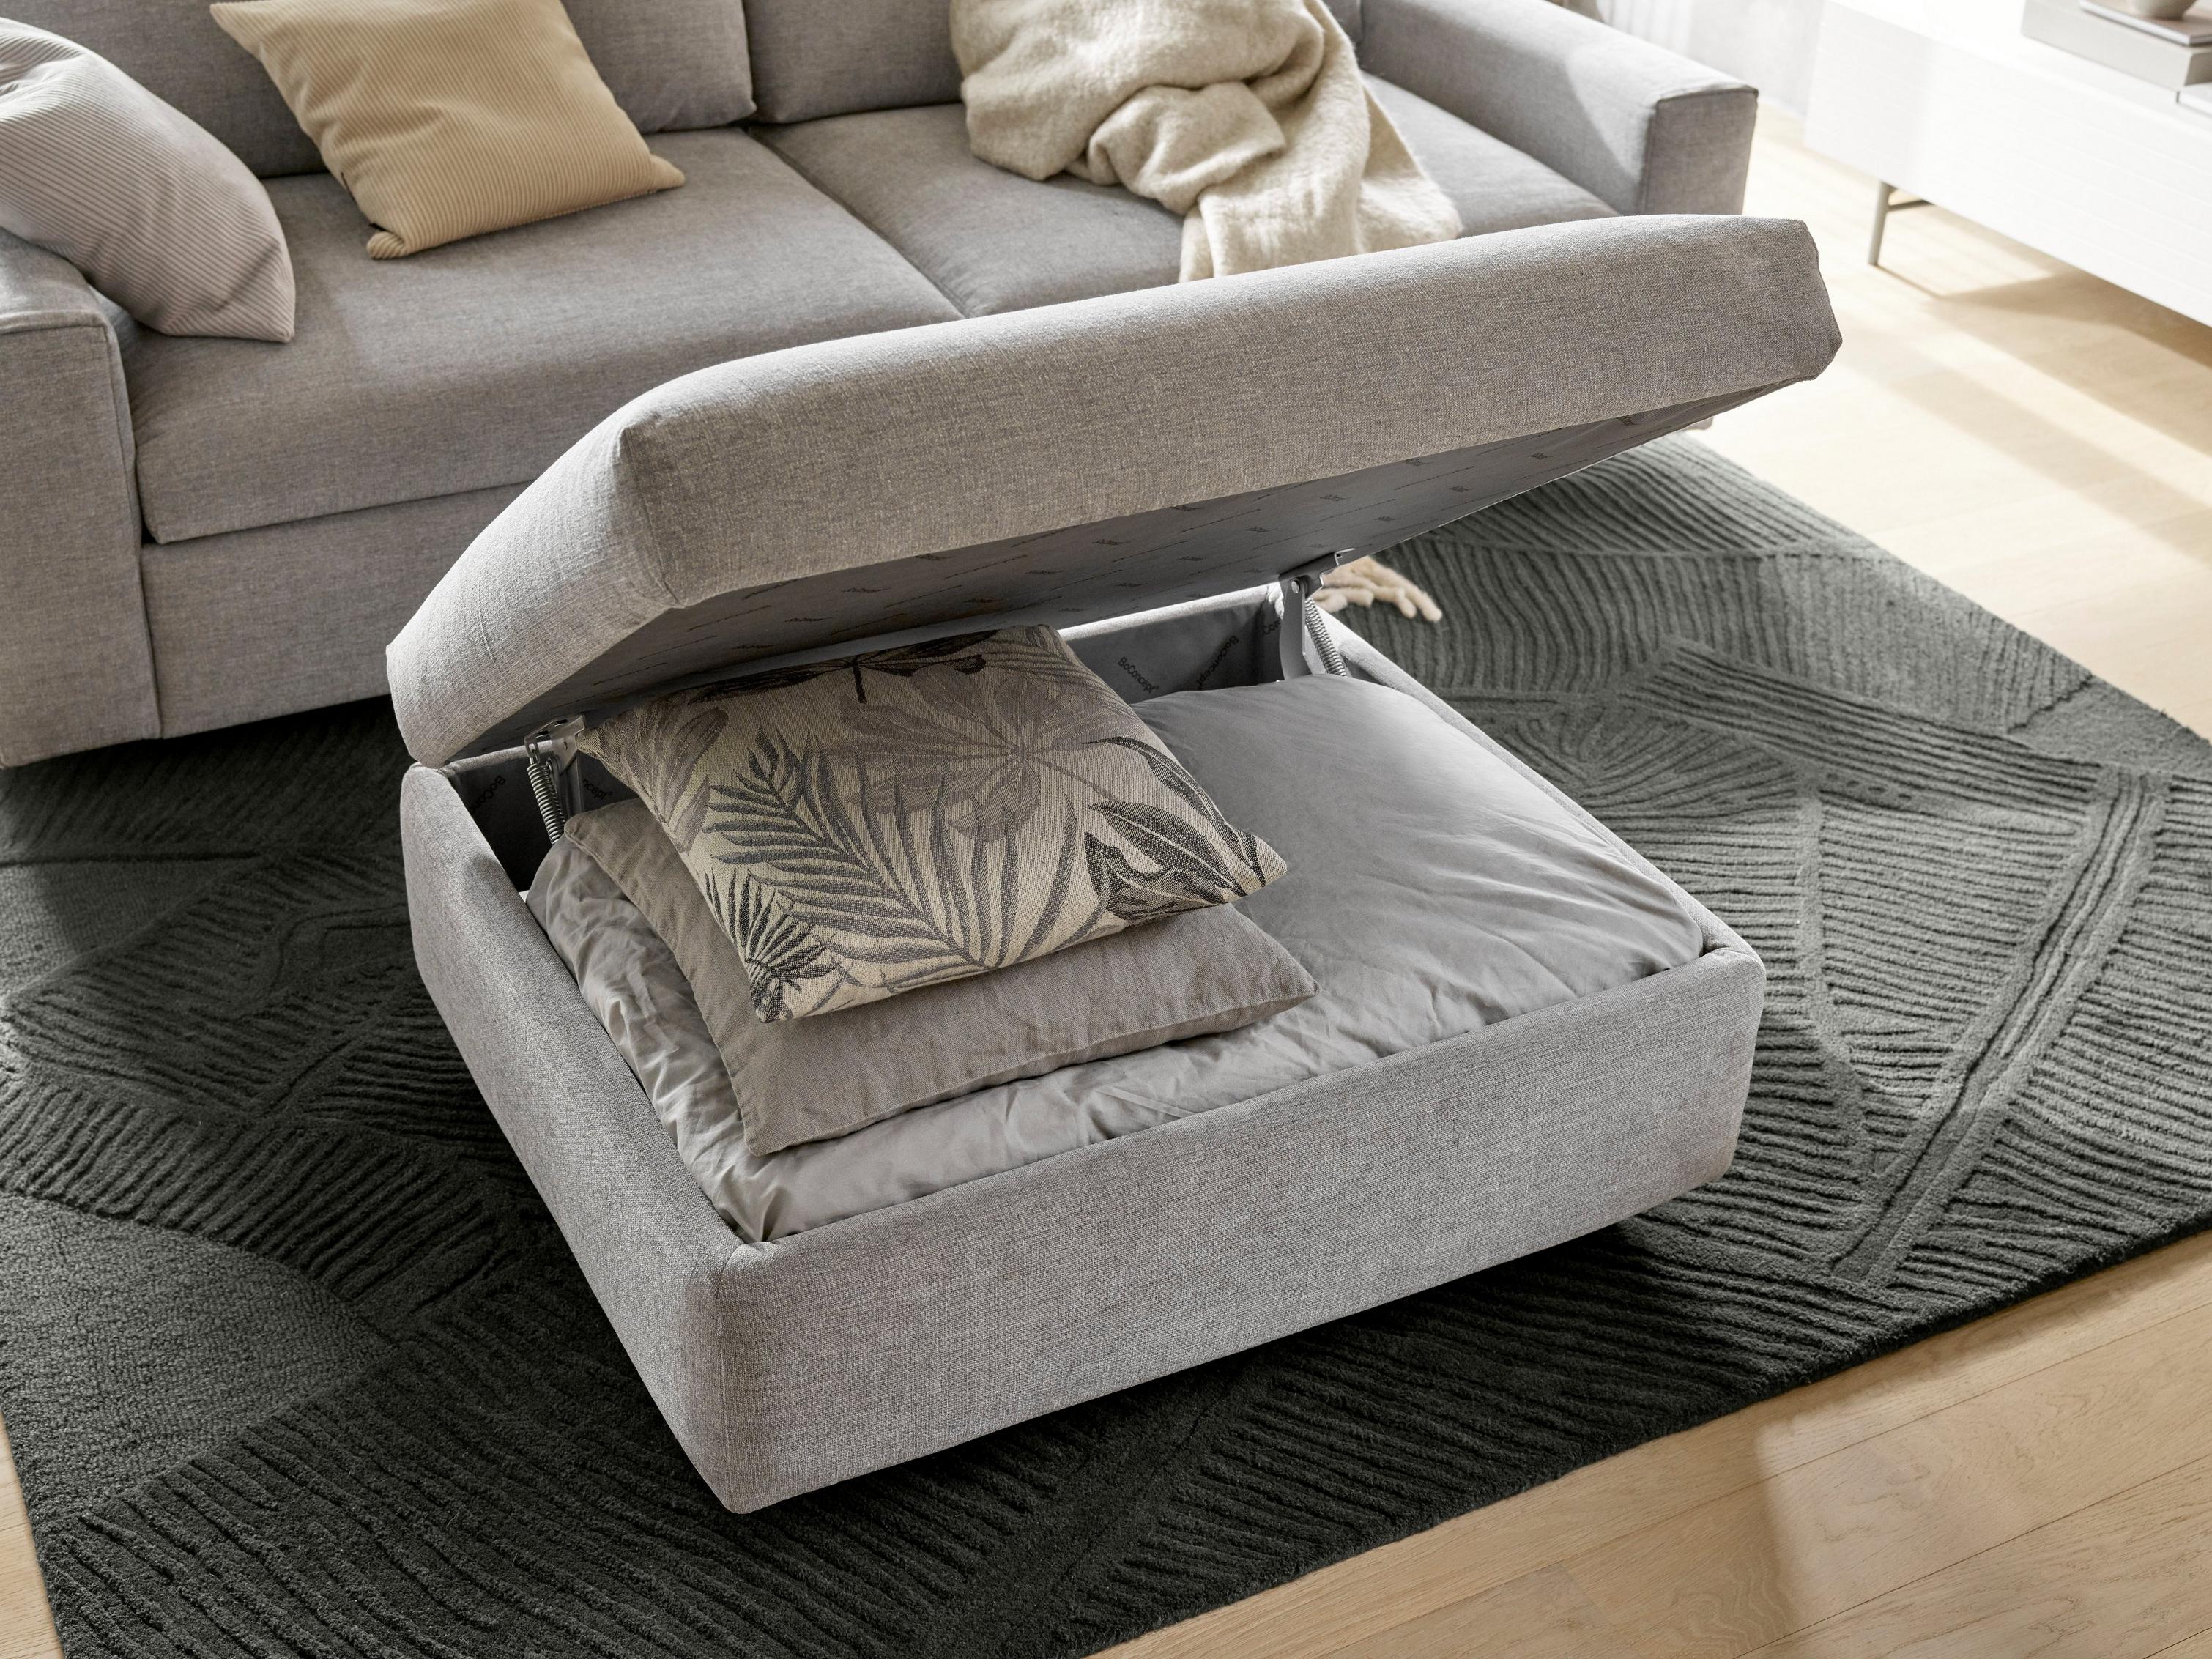 Gray upholstered footstool with storage, open showing pillows, by a sofa on a textured rug.